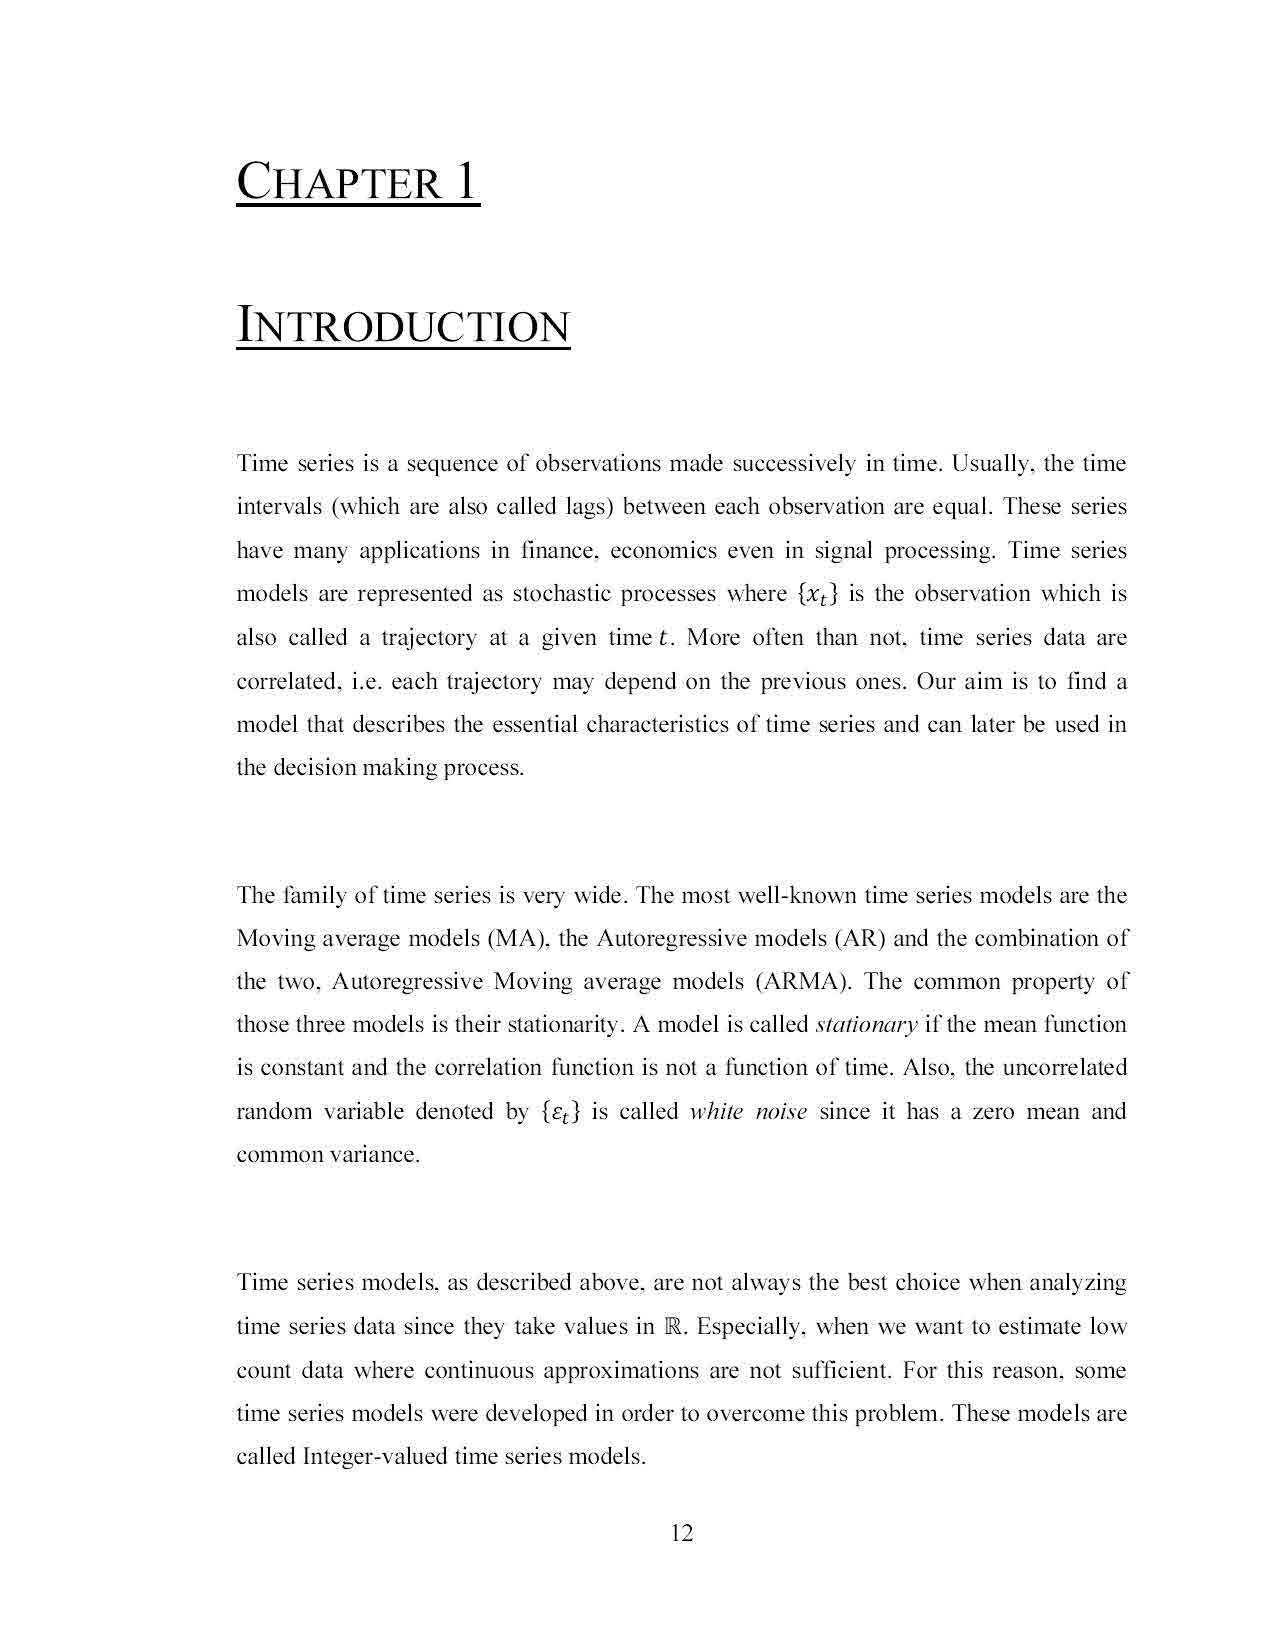 Phd thesis on derivatives